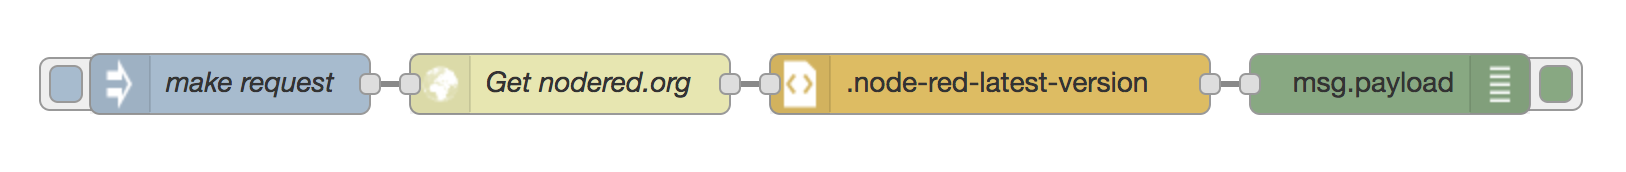 Nodered recipe simple-get-request.png